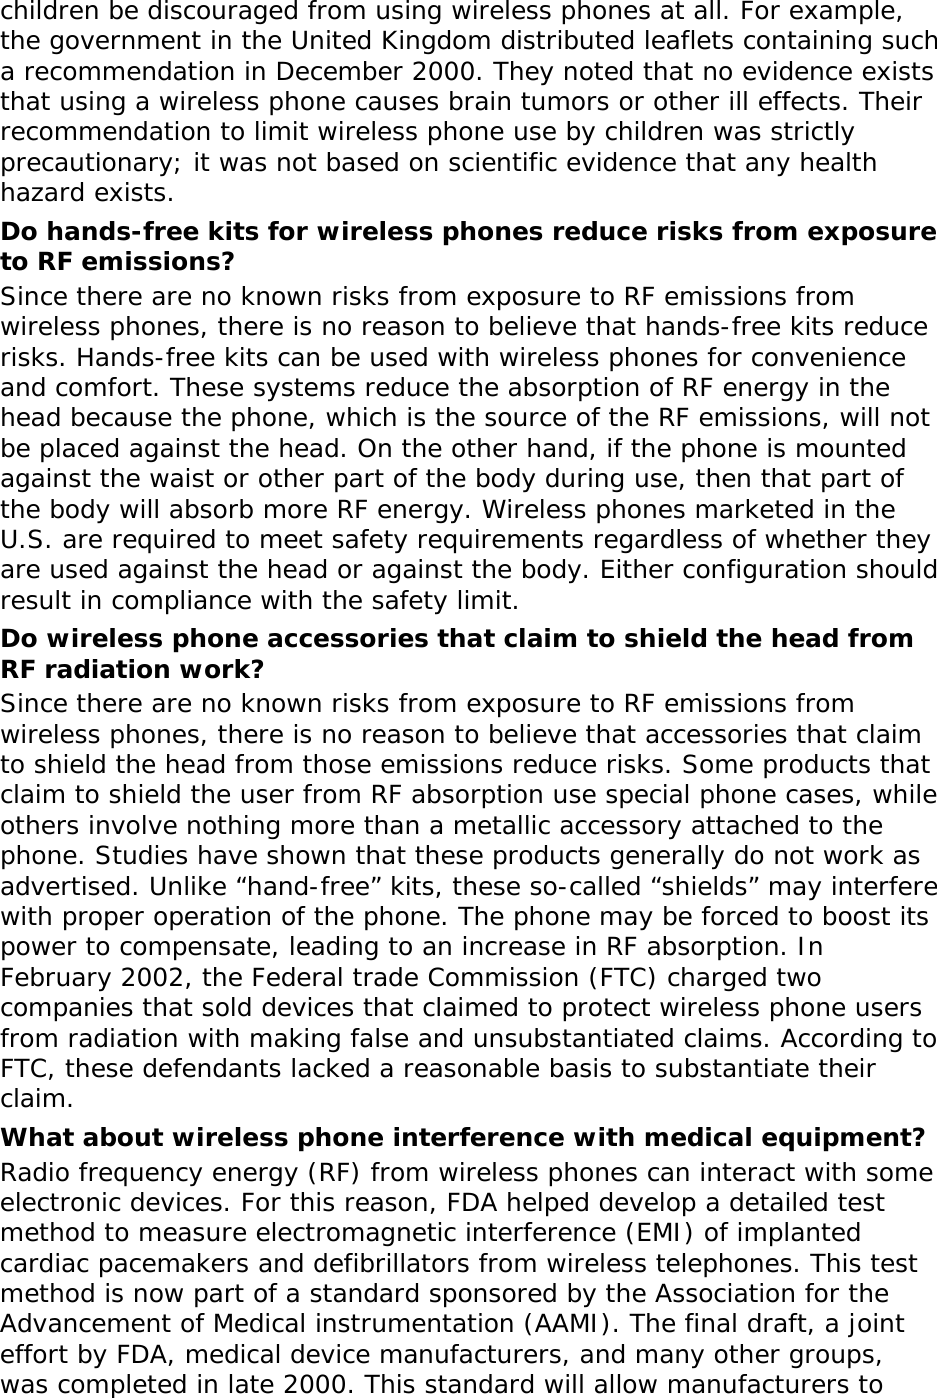 children be discouraged from using wireless phones at all. For example, the government in the United Kingdom distributed leaflets containing such a recommendation in December 2000. They noted that no evidence exists that using a wireless phone causes brain tumors or other ill effects. Their recommendation to limit wireless phone use by children was strictly precautionary; it was not based on scientific evidence that any health hazard exists.  Do hands-free kits for wireless phones reduce risks from exposure to RF emissions? Since there are no known risks from exposure to RF emissions from wireless phones, there is no reason to believe that hands-free kits reduce risks. Hands-free kits can be used with wireless phones for convenience and comfort. These systems reduce the absorption of RF energy in the head because the phone, which is the source of the RF emissions, will not be placed against the head. On the other hand, if the phone is mounted against the waist or other part of the body during use, then that part of the body will absorb more RF energy. Wireless phones marketed in the U.S. are required to meet safety requirements regardless of whether they are used against the head or against the body. Either configuration should result in compliance with the safety limit. Do wireless phone accessories that claim to shield the head from RF radiation work? Since there are no known risks from exposure to RF emissions from wireless phones, there is no reason to believe that accessories that claim to shield the head from those emissions reduce risks. Some products that claim to shield the user from RF absorption use special phone cases, while others involve nothing more than a metallic accessory attached to the phone. Studies have shown that these products generally do not work as advertised. Unlike “hand-free” kits, these so-called “shields” may interfere with proper operation of the phone. The phone may be forced to boost its power to compensate, leading to an increase in RF absorption. In February 2002, the Federal trade Commission (FTC) charged two companies that sold devices that claimed to protect wireless phone users from radiation with making false and unsubstantiated claims. According to FTC, these defendants lacked a reasonable basis to substantiate their claim. What about wireless phone interference with medical equipment? Radio frequency energy (RF) from wireless phones can interact with some electronic devices. For this reason, FDA helped develop a detailed test method to measure electromagnetic interference (EMI) of implanted cardiac pacemakers and defibrillators from wireless telephones. This test method is now part of a standard sponsored by the Association for the Advancement of Medical instrumentation (AAMI). The final draft, a joint effort by FDA, medical device manufacturers, and many other groups, was completed in late 2000. This standard will allow manufacturers to 